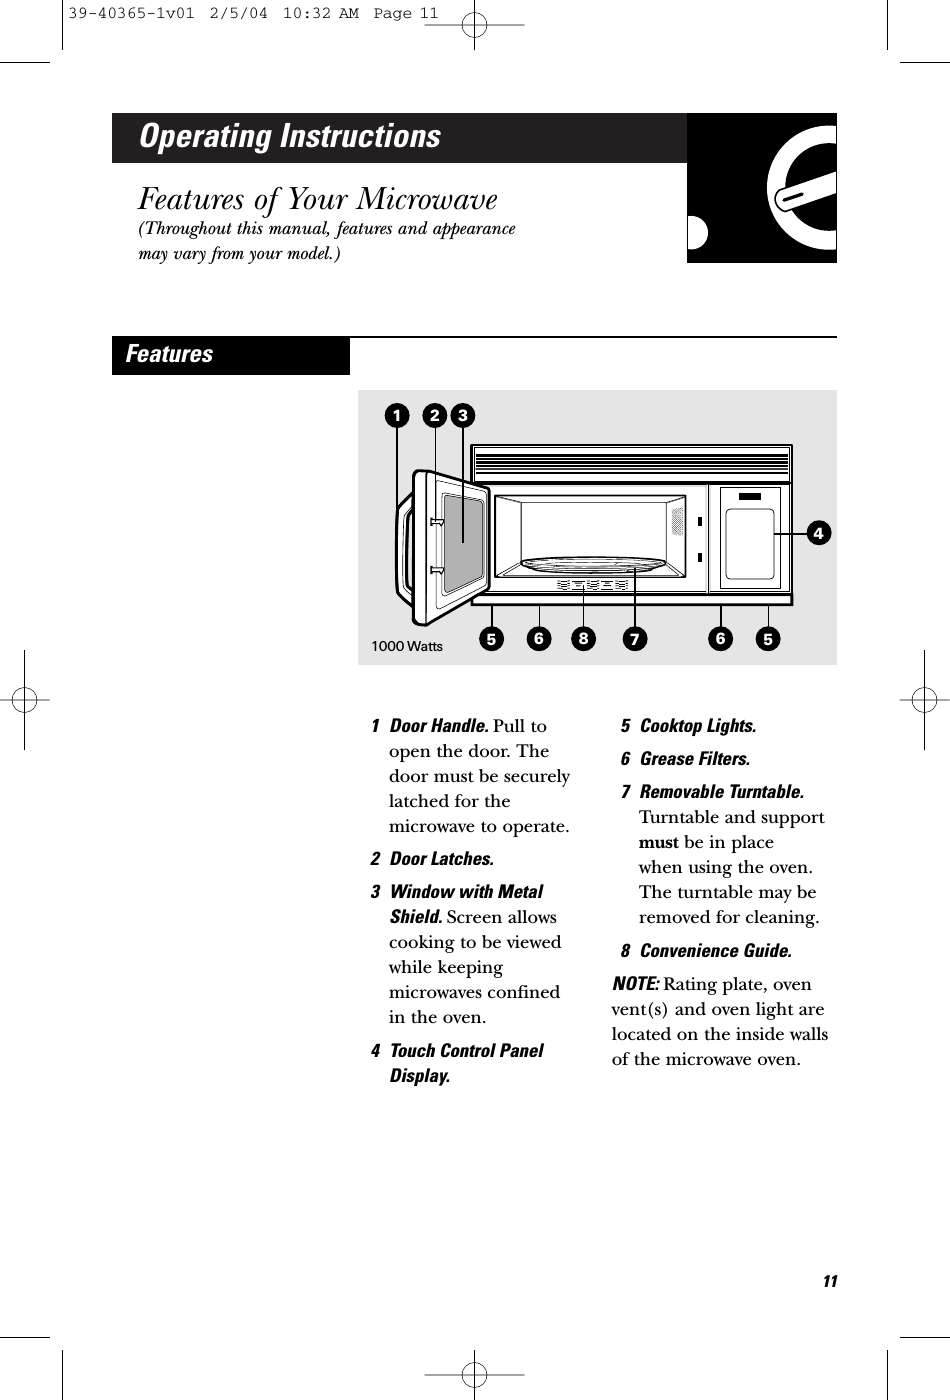 Operating InstructionsFeatures of Your Microwave(Throughout this manual, features and appearancemay vary from your model.)1 Door Handle. Pull toopen the door. Thedoor must be securelylatched for themicrowave to operate.2 Door Latches.3 Window with MetalShield. Screen allowscooking to be viewedwhile keepingmicrowaves confined in the oven.4 Touch Control PanelDisplay.5 Cooktop Lights.6 Grease Filters.7 Removable Turntable.Turntable and supportmust be in place when using the oven.The turntable may beremoved for cleaning.8 Convenience Guide.NOTE: Rating plate, ovenvent(s) and oven light arelocated on the inside wallsof the microwave oven.Features3215568741161000 Watts39-40365-1v01  2/5/04  10:32 AM  Page 11